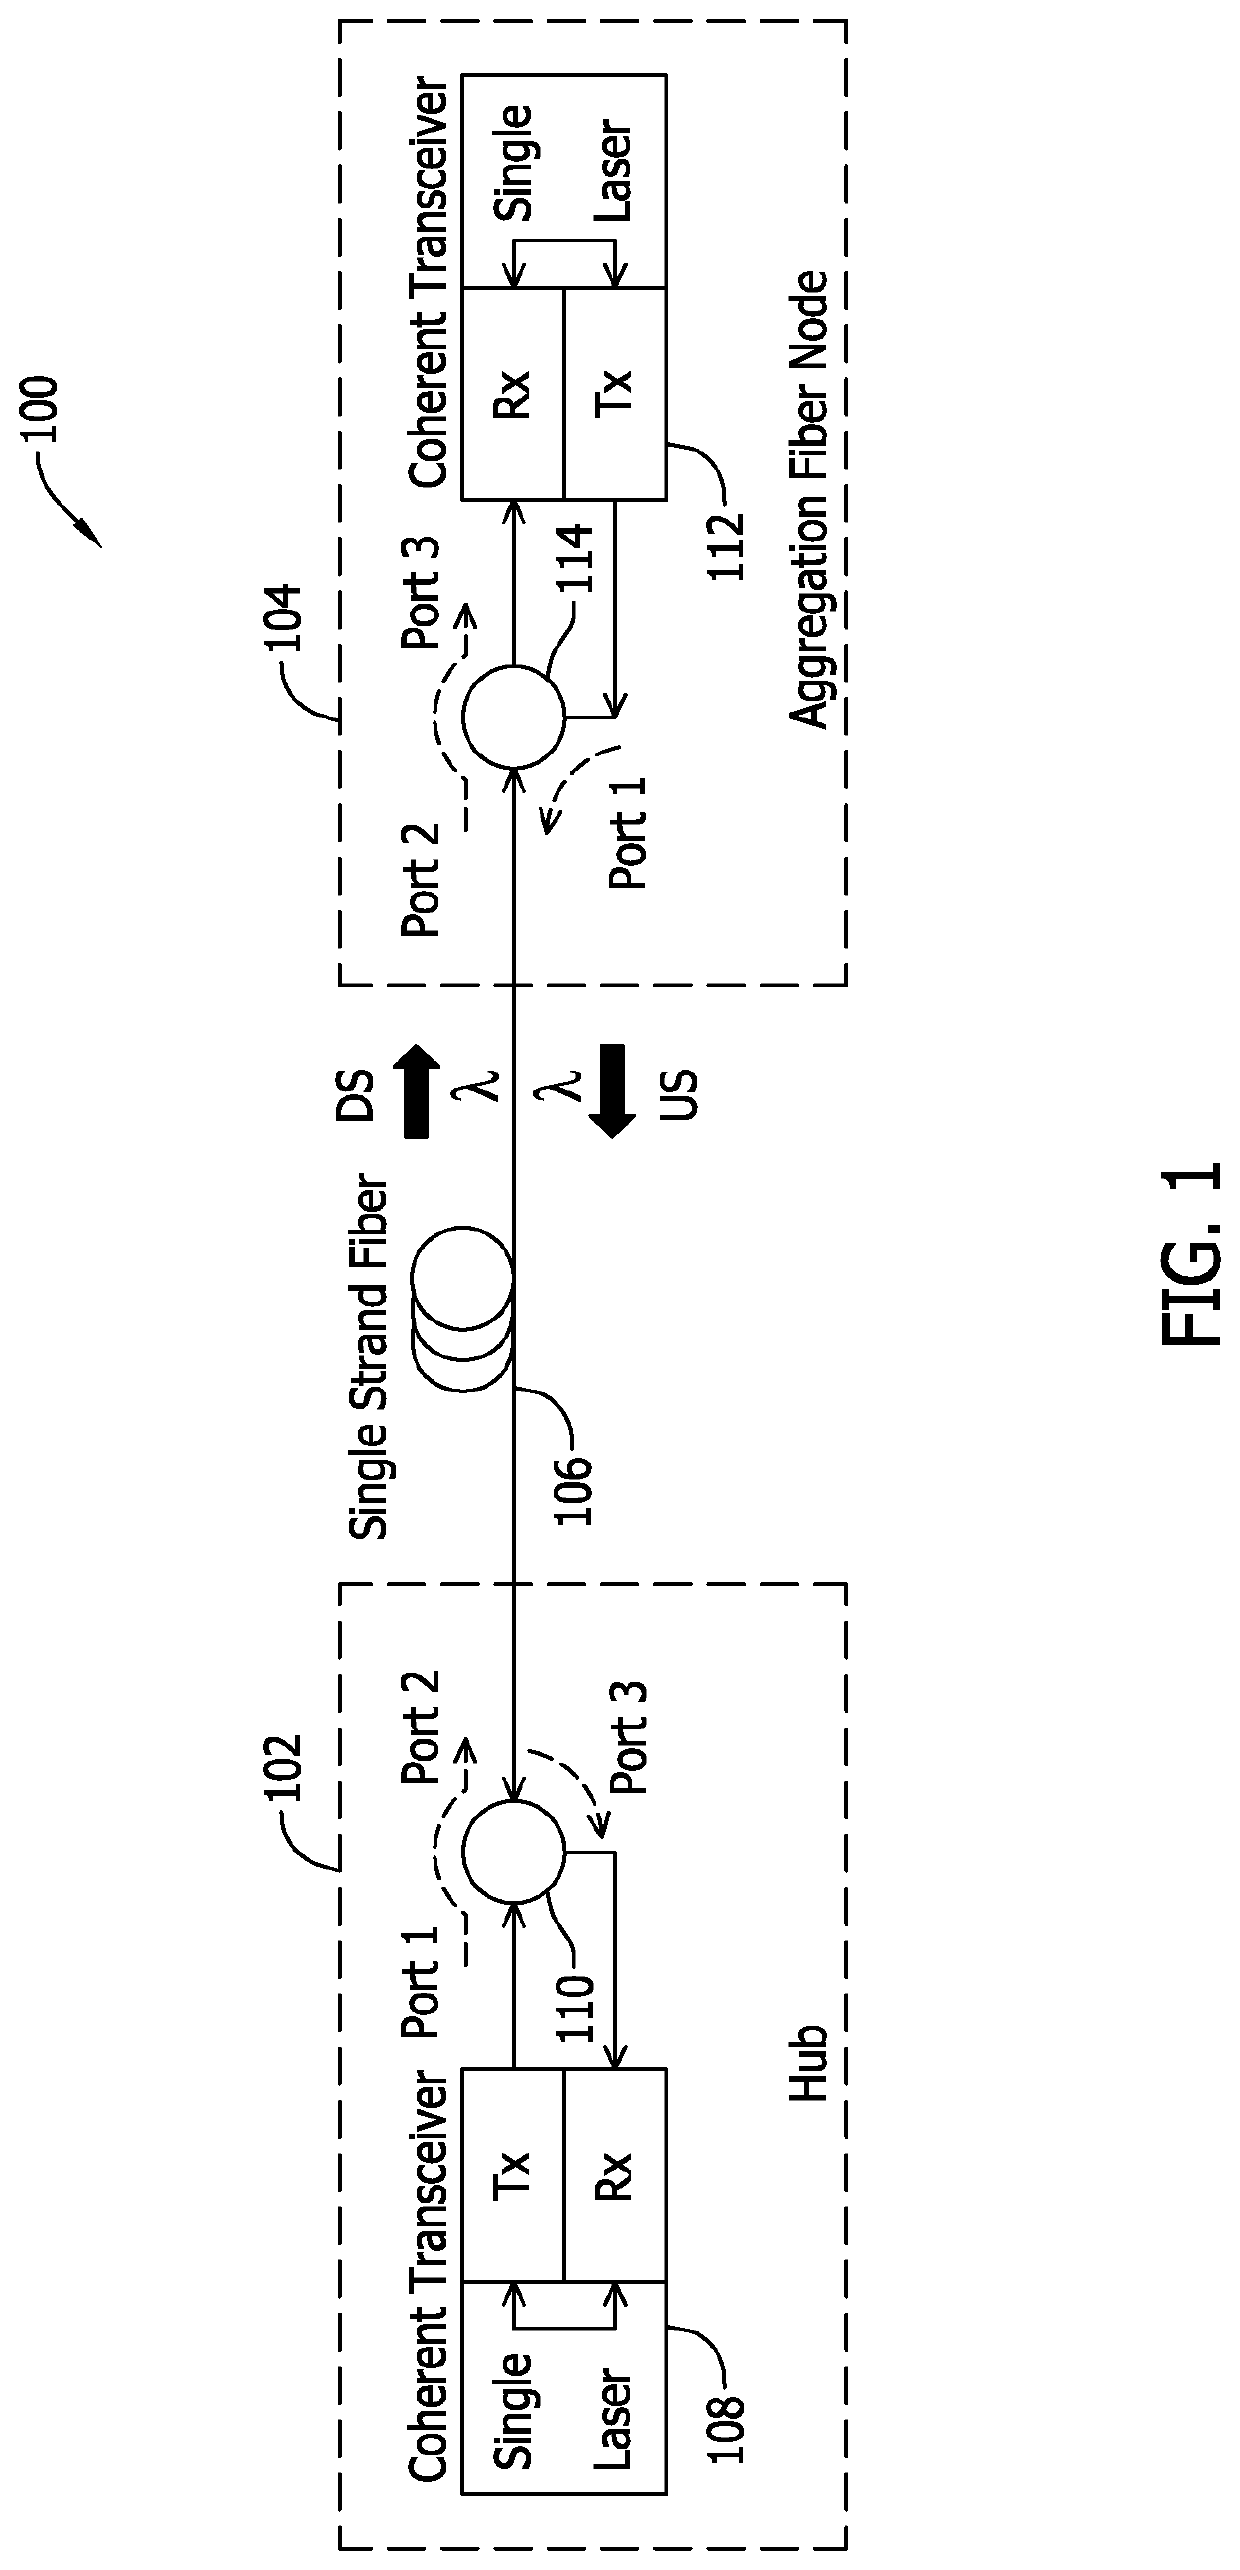 Systems and methods for full duplex coherent optics